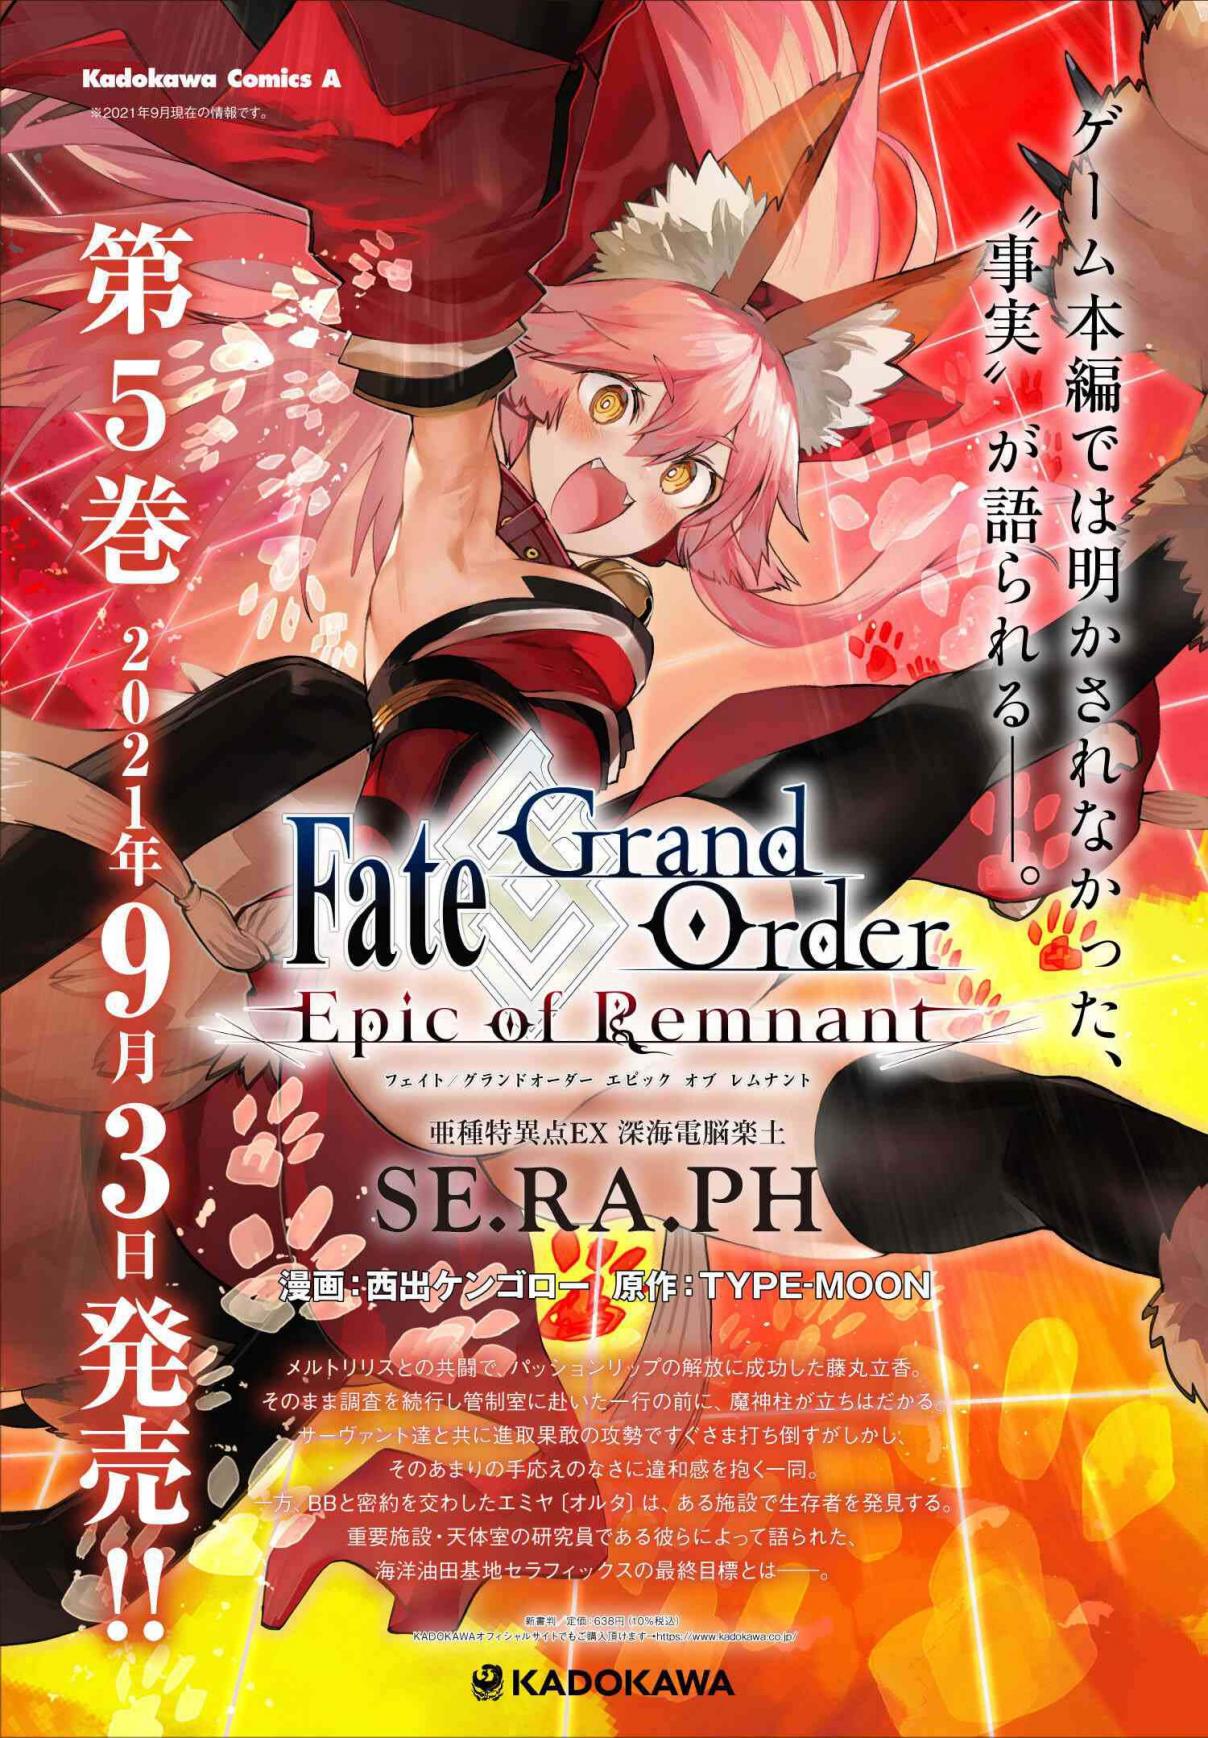 Fate/Grand Order: Epic of Remnant - Deep Sea Cyber-Paradise SE.RA.PH 27.1